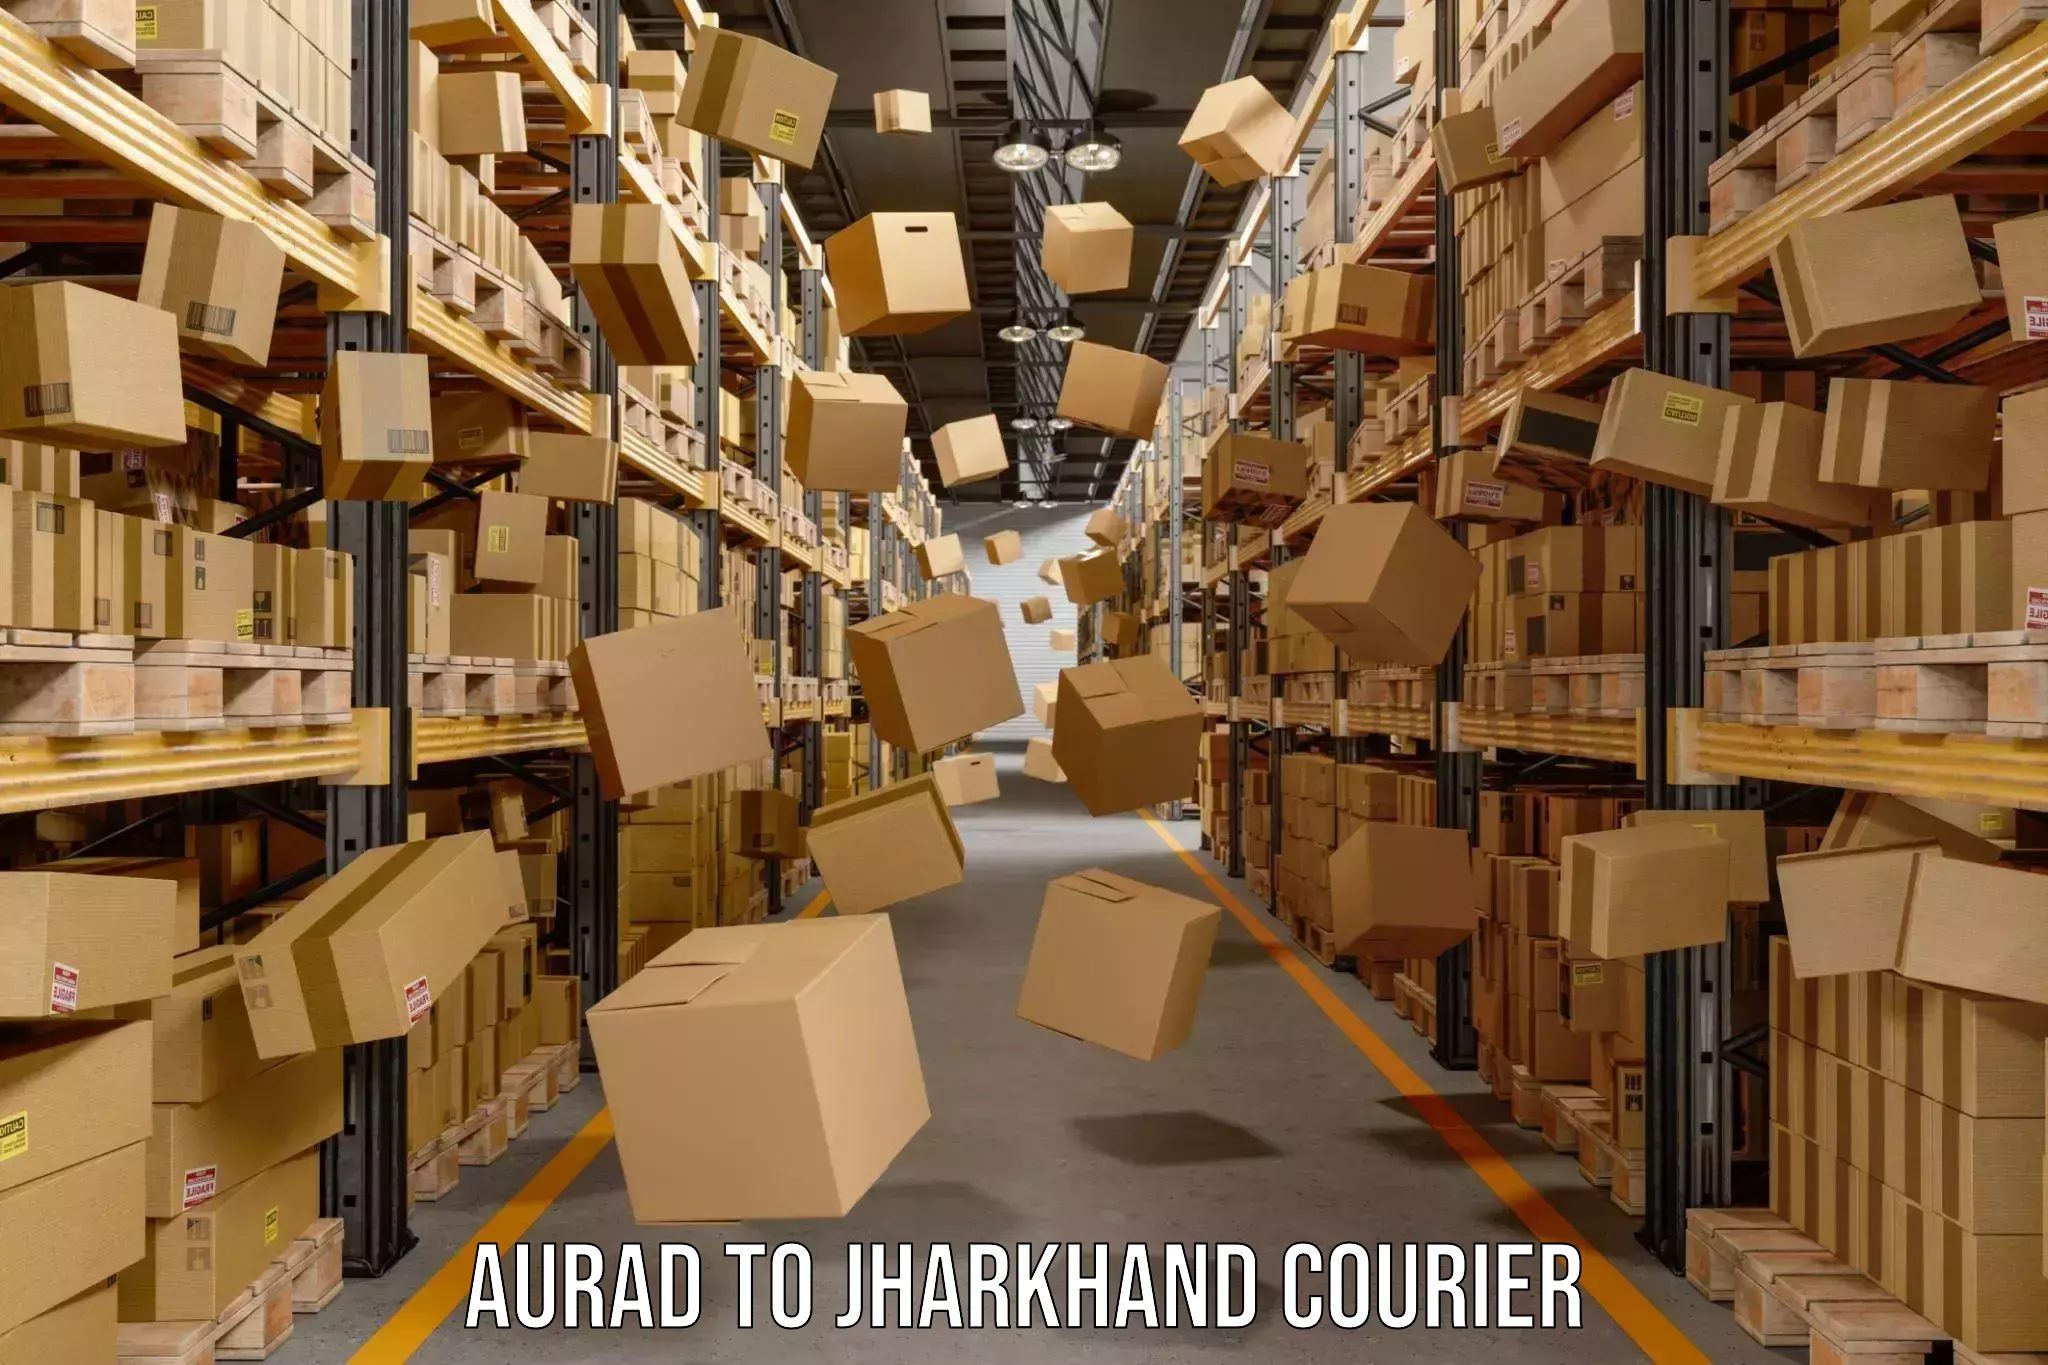 Express package handling in Aurad to Jharkhand